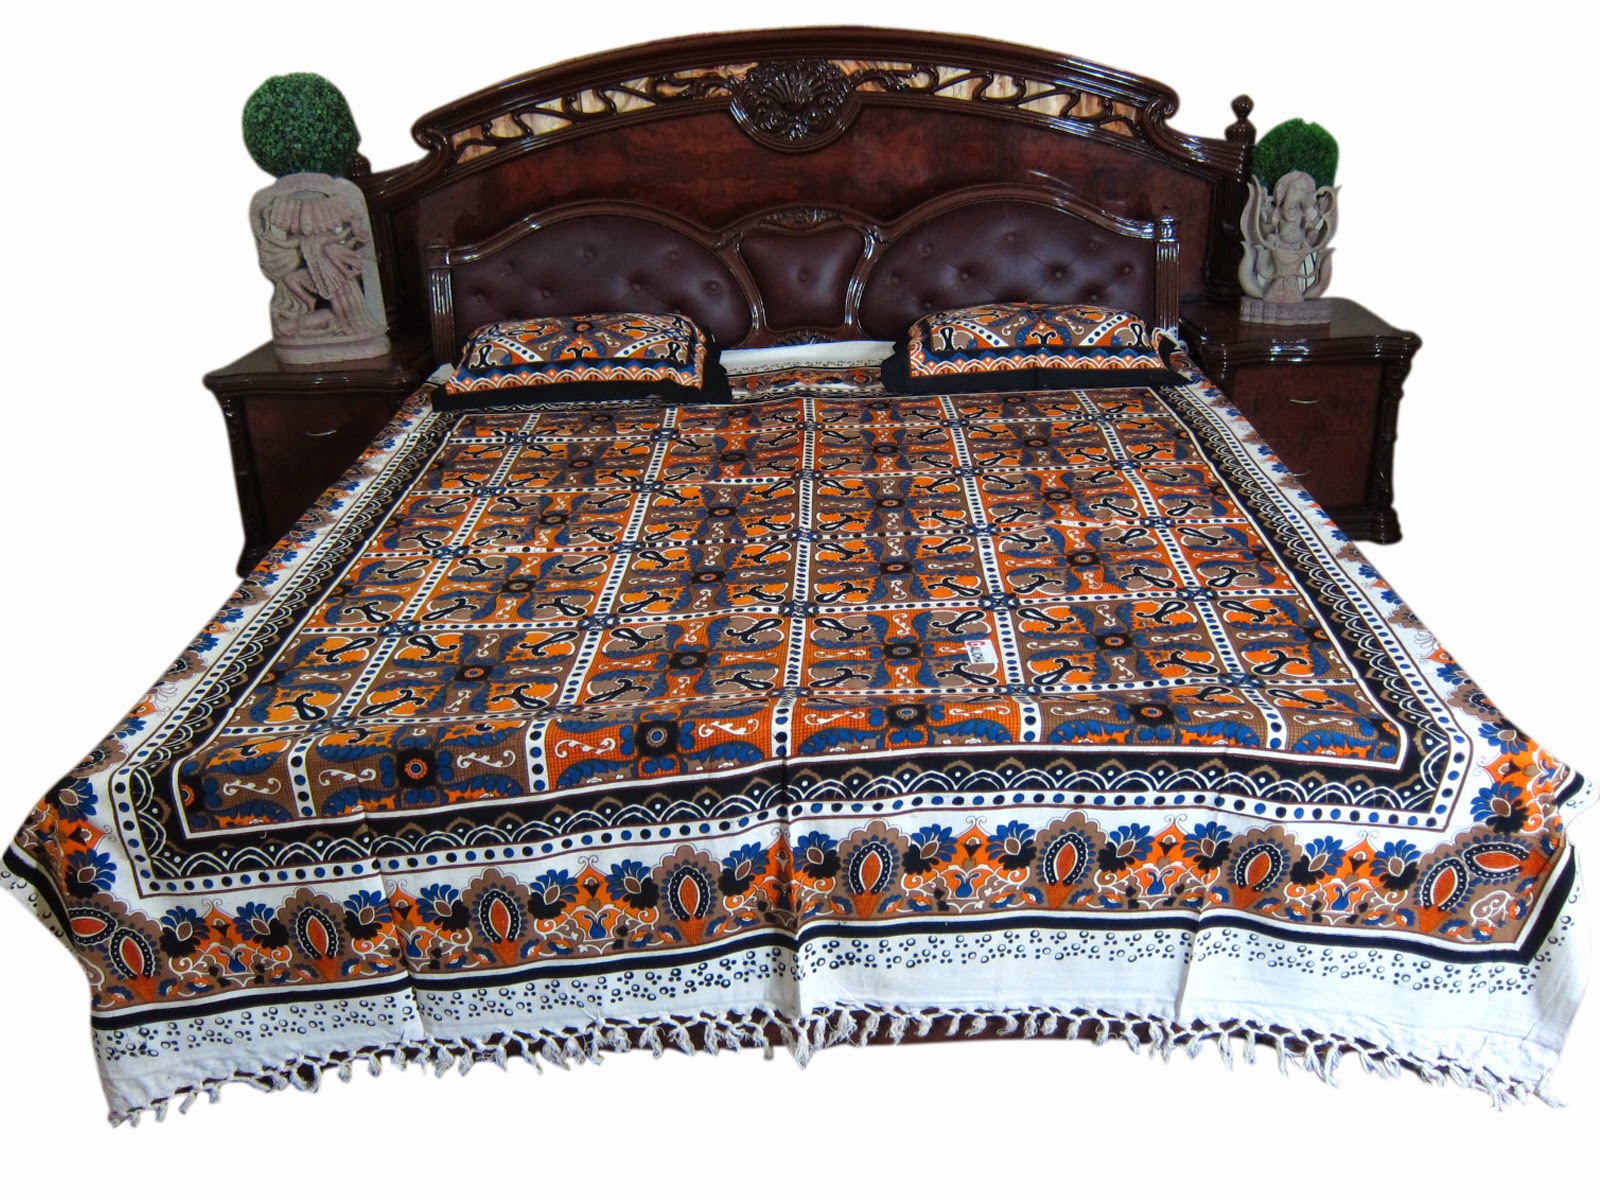 Indian Bedding Bedspread: Indian Style Bedding #bohorooms # ...